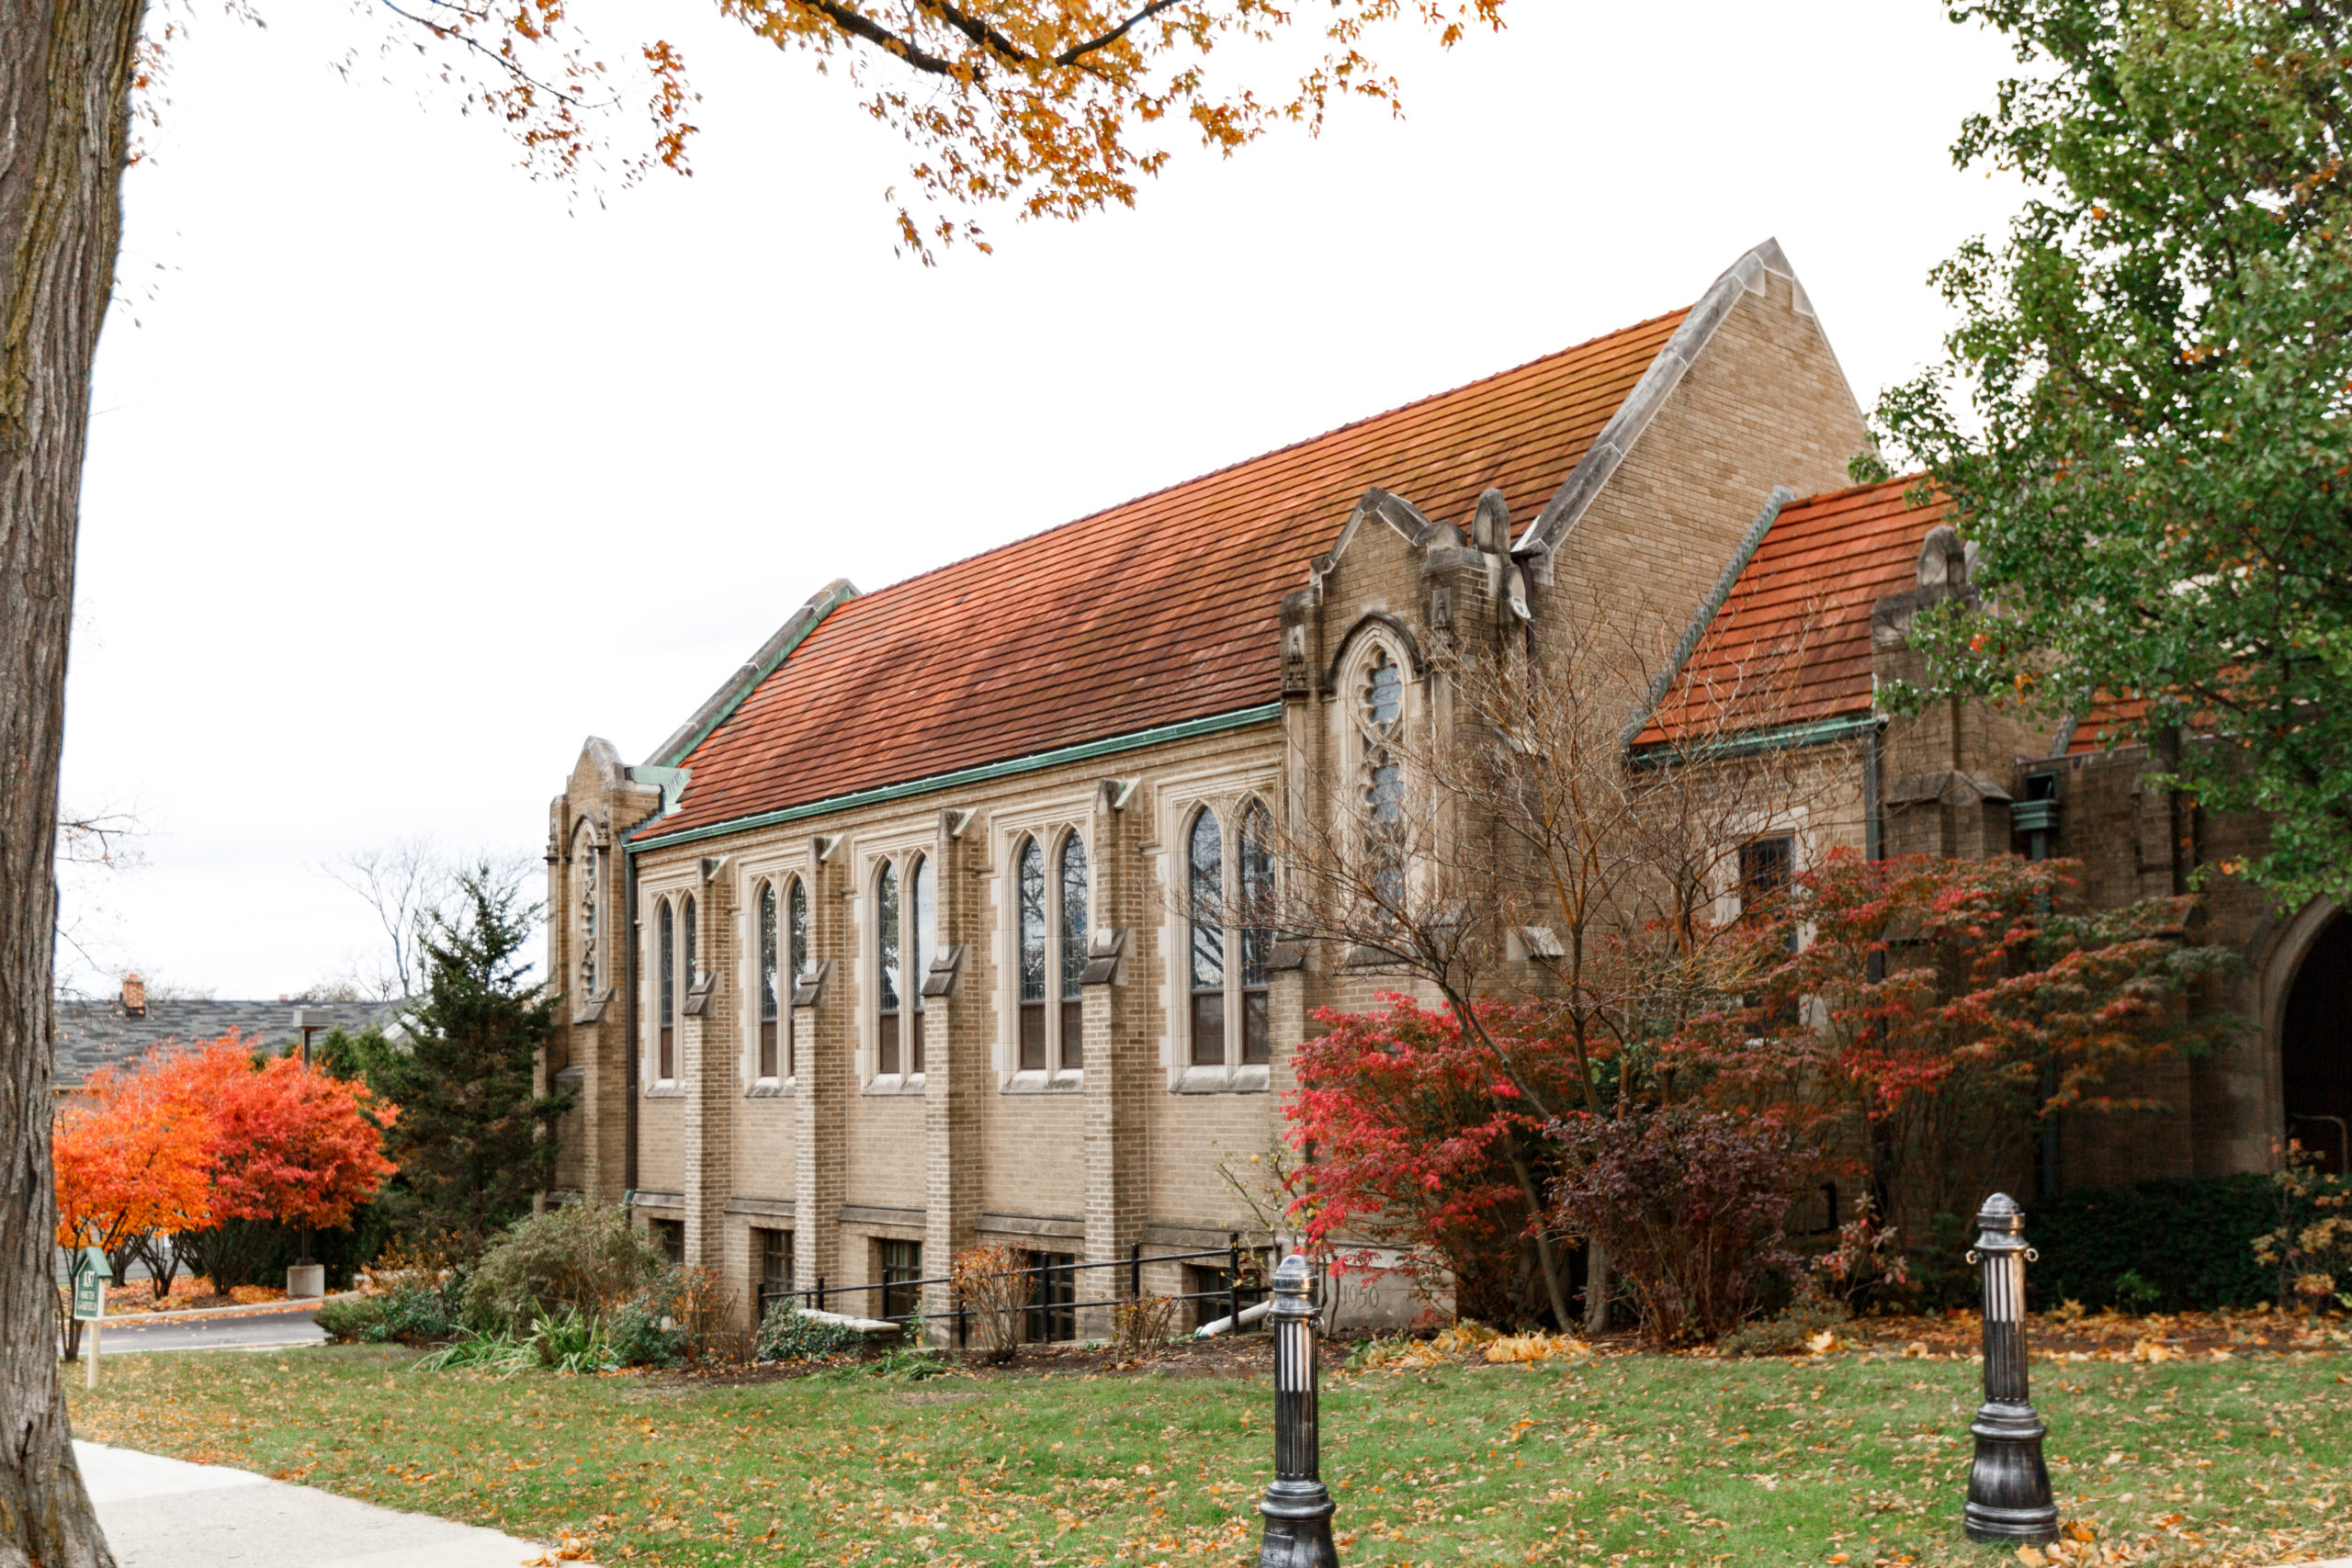 Union Church of Hinsdale exterior in Autumn